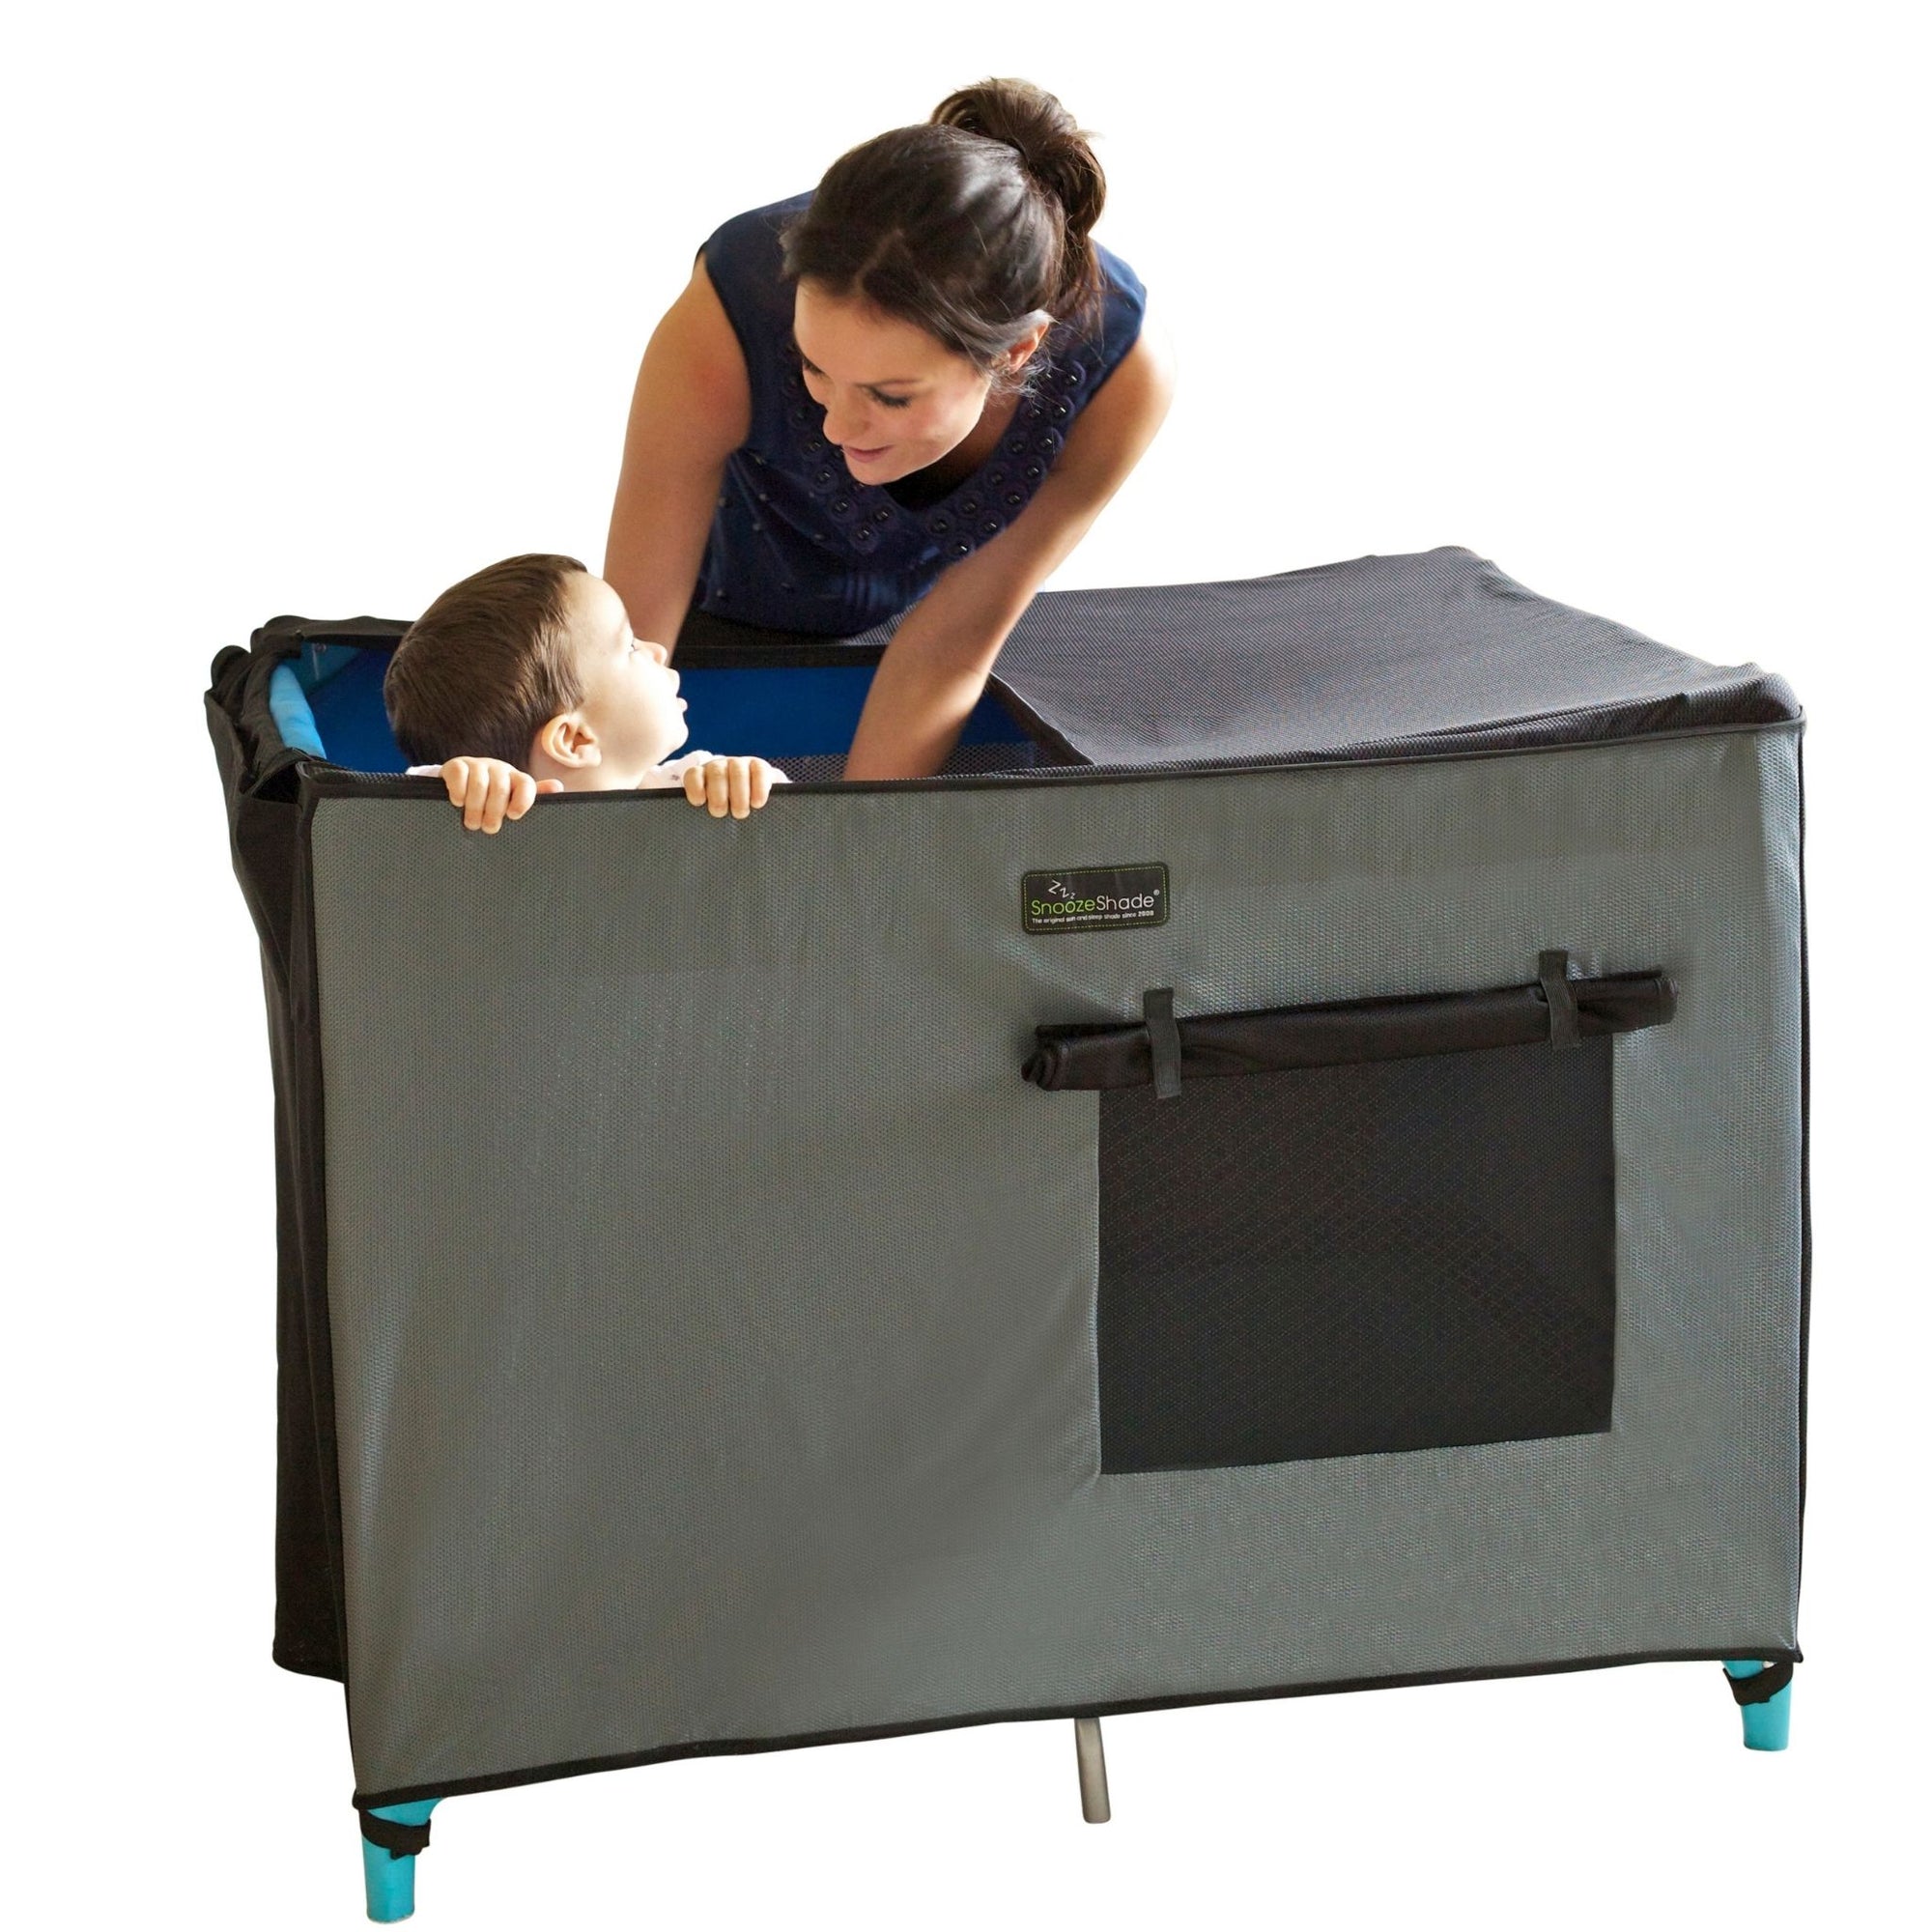 SnoozeShade for Travel Cots | Travel cot blackout canopy | Air-permeable mesh blocks 94% of light